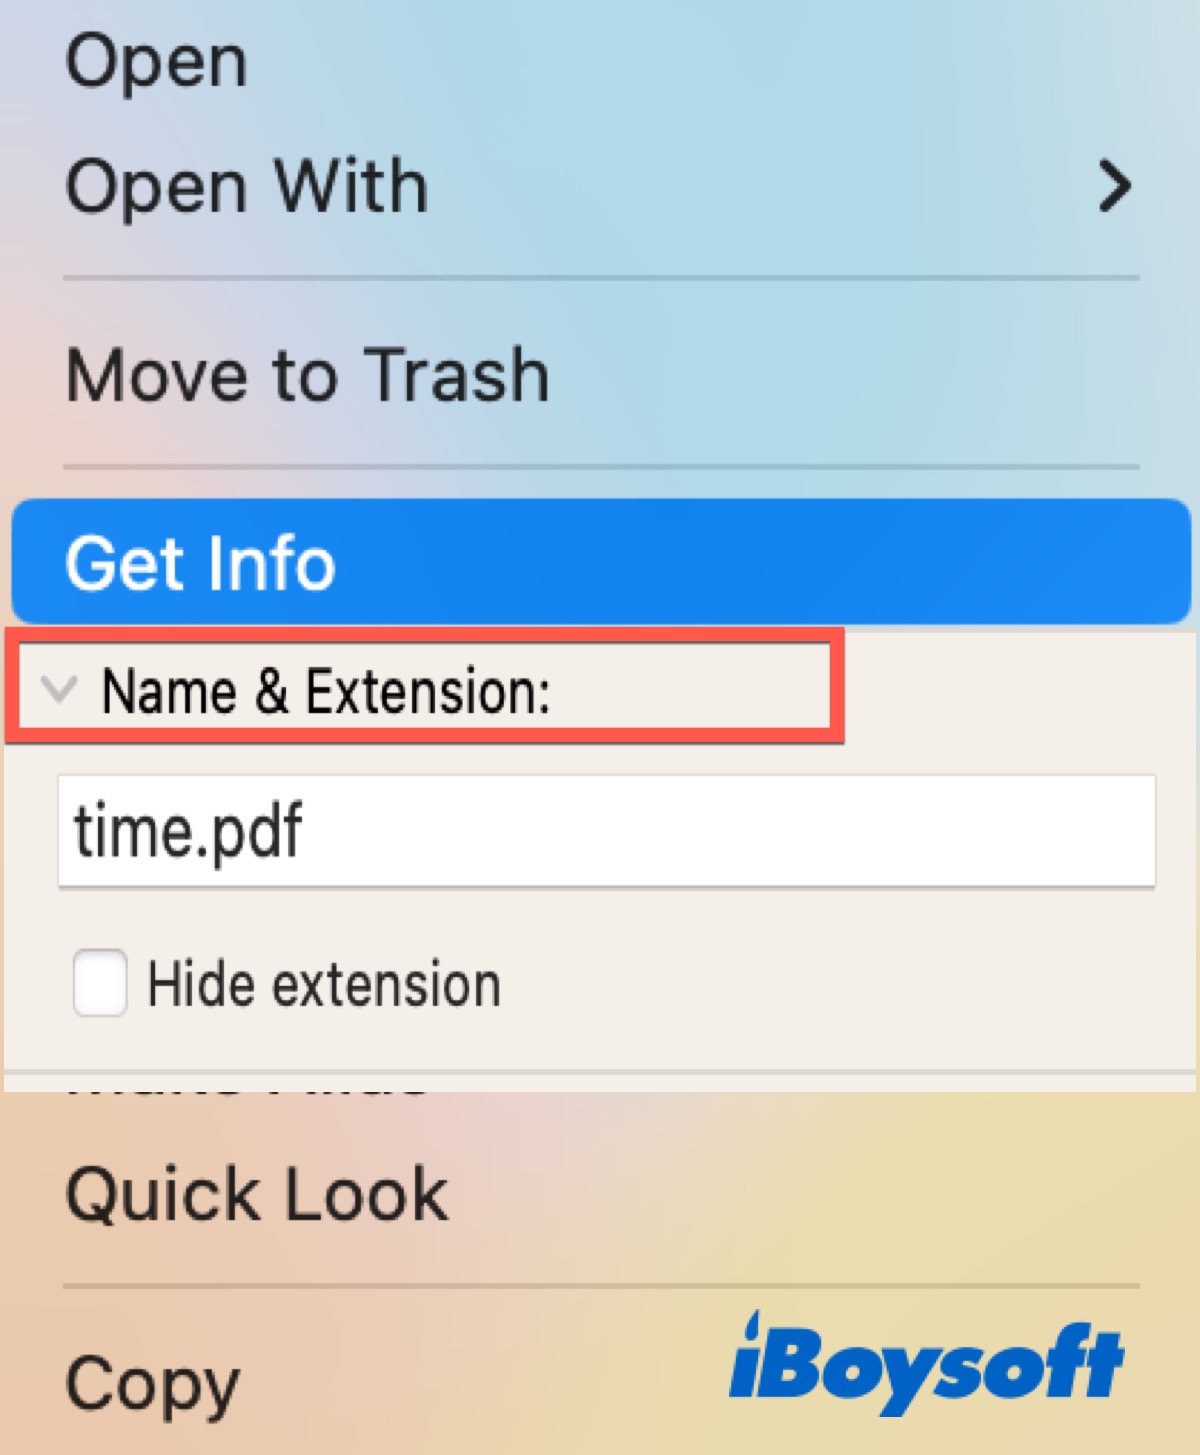 Change the extension of the file